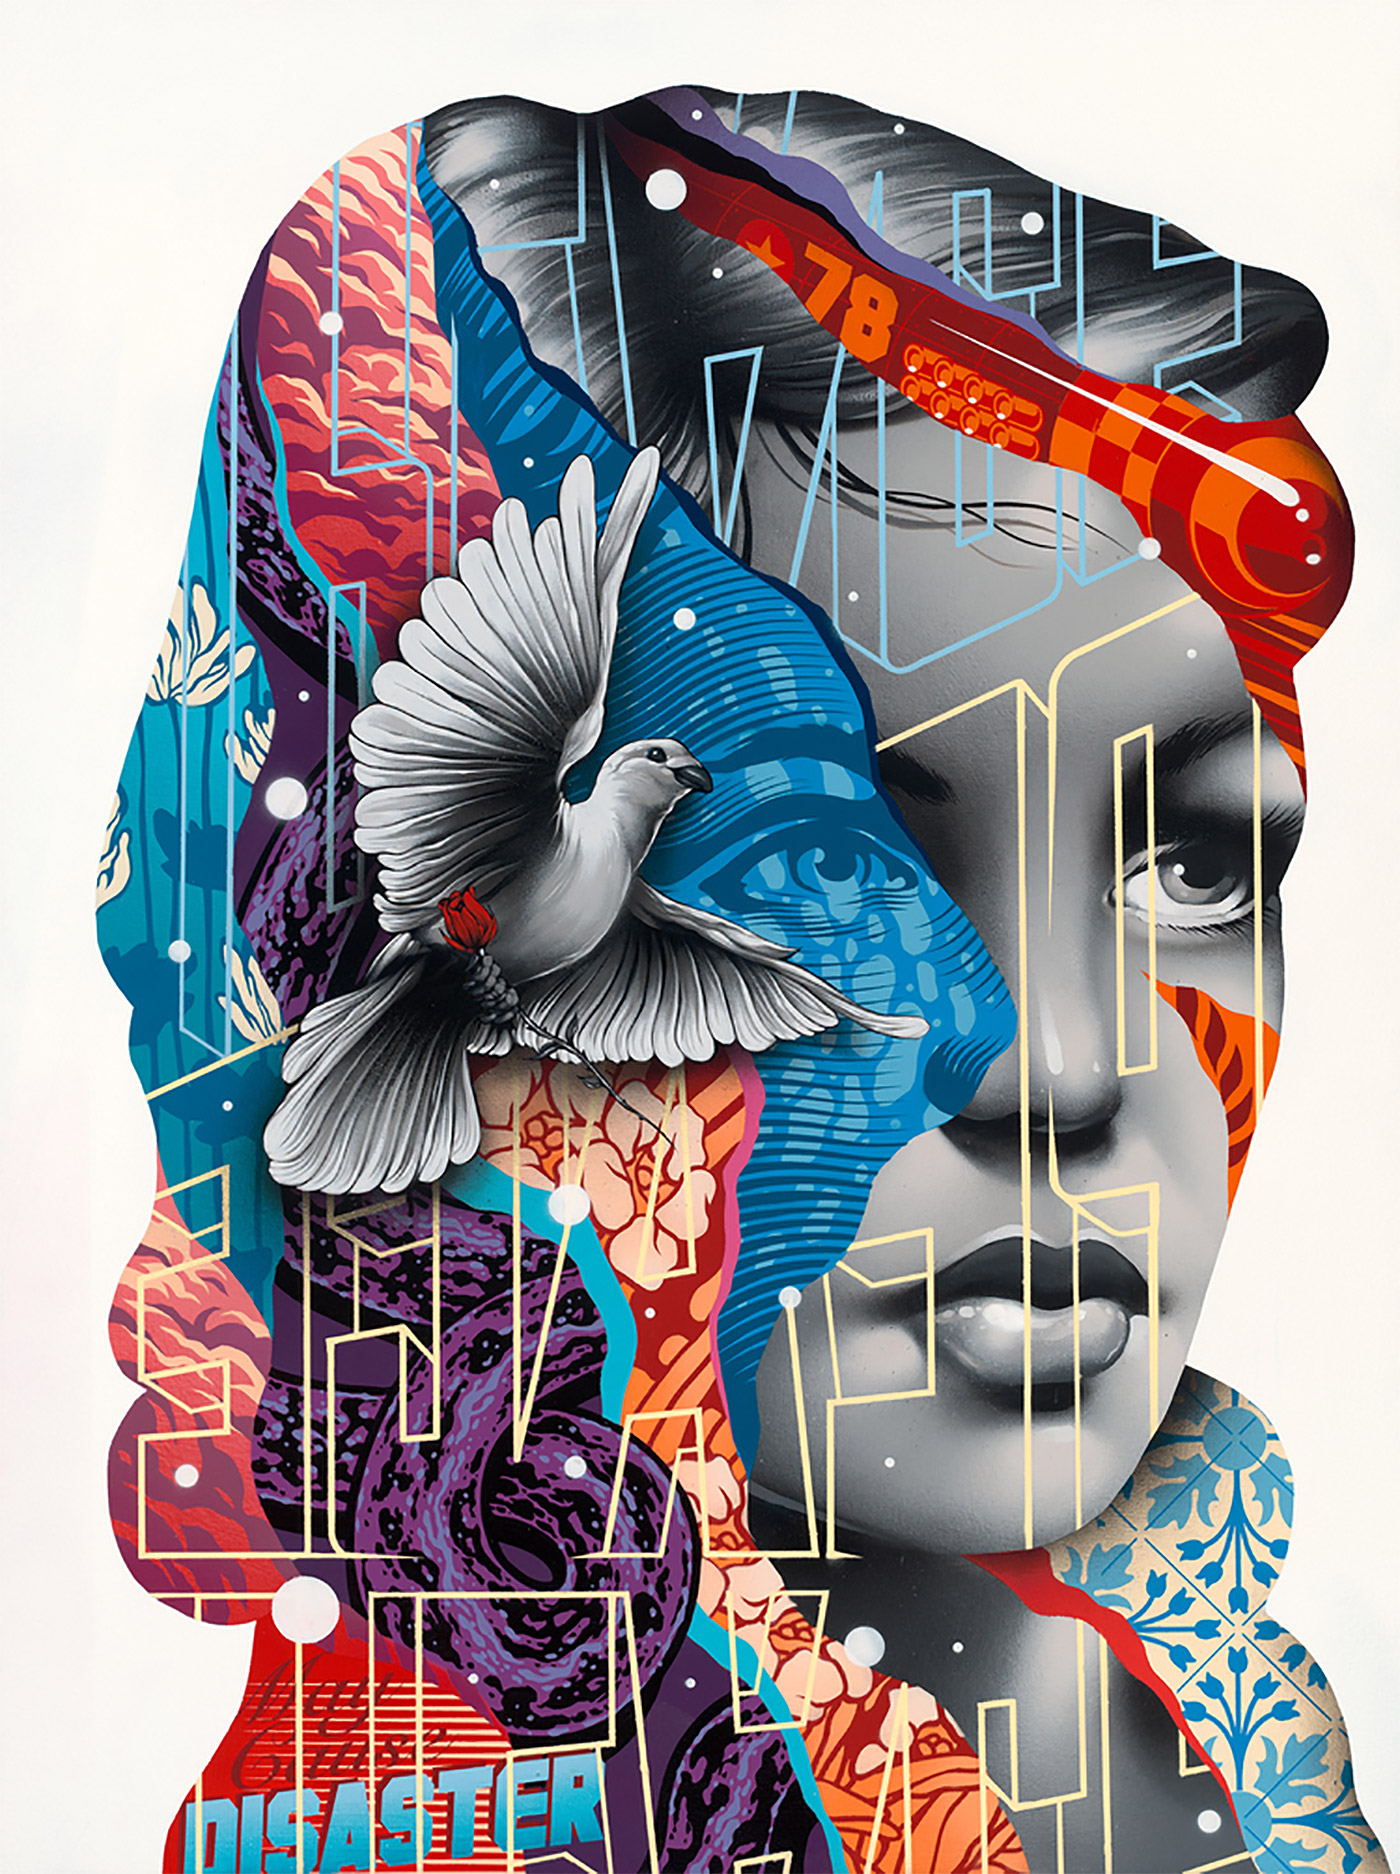 New Mixed Media Artworks by Tristan Eaton | Daily design inspiration